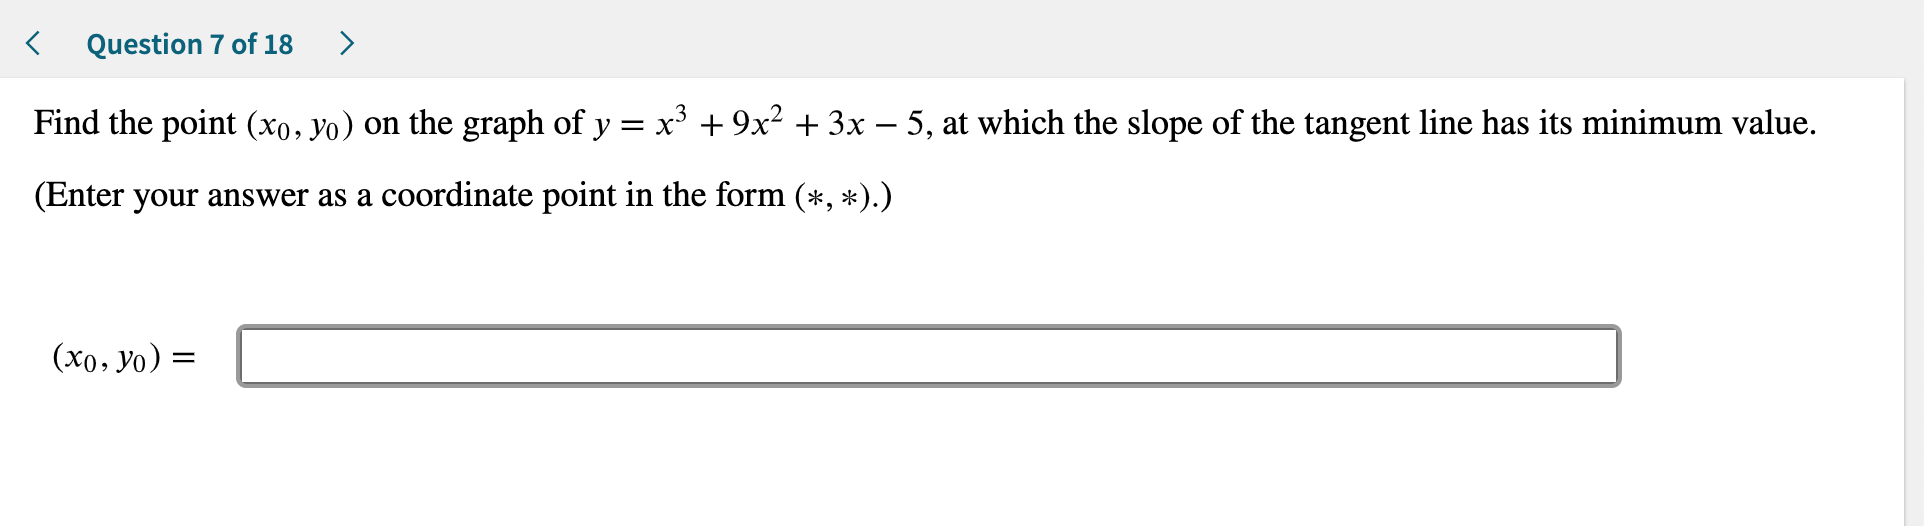 Question 7 of 18
Find the point (xo, yo) on the graph of y
x39x2 3x - 5, at which the slope of the tangent line has its minimum value
(Enter your answer as a coordinate point in the form (*, *).)
(xo, yo)=
